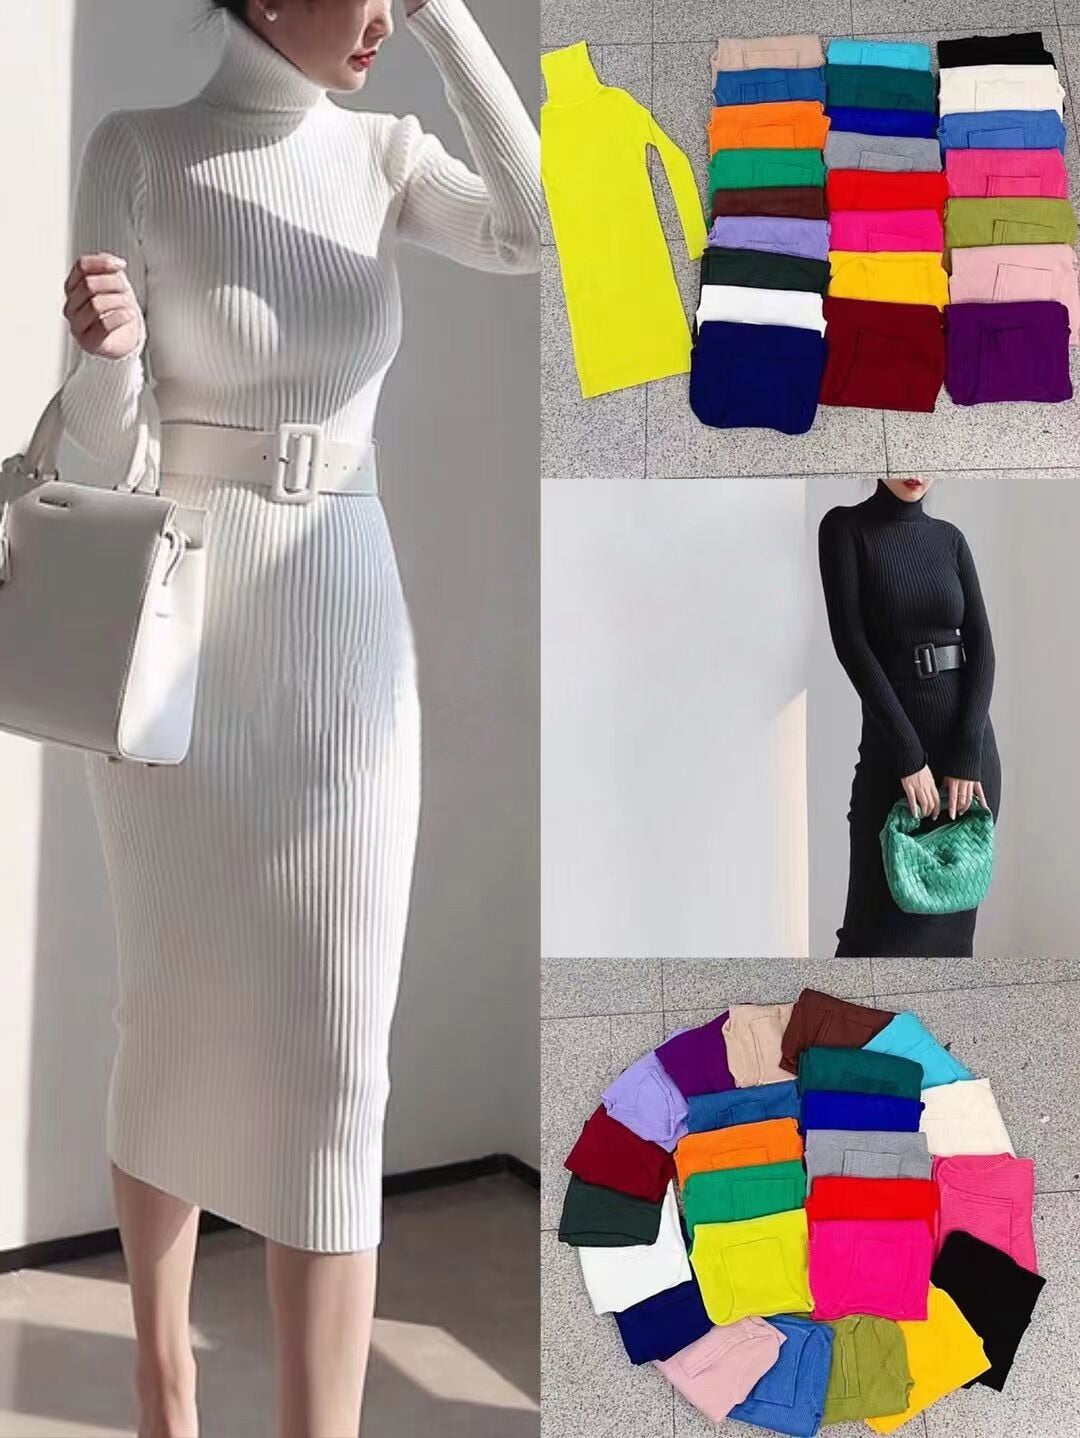 H Han Queen Knitted Bodycon Dress Bottoming Women Soft Elastic Turtleneck Sweater Autumn Winter Midi Party Dresses With Belt   104.99 EZYSELLA SHOP